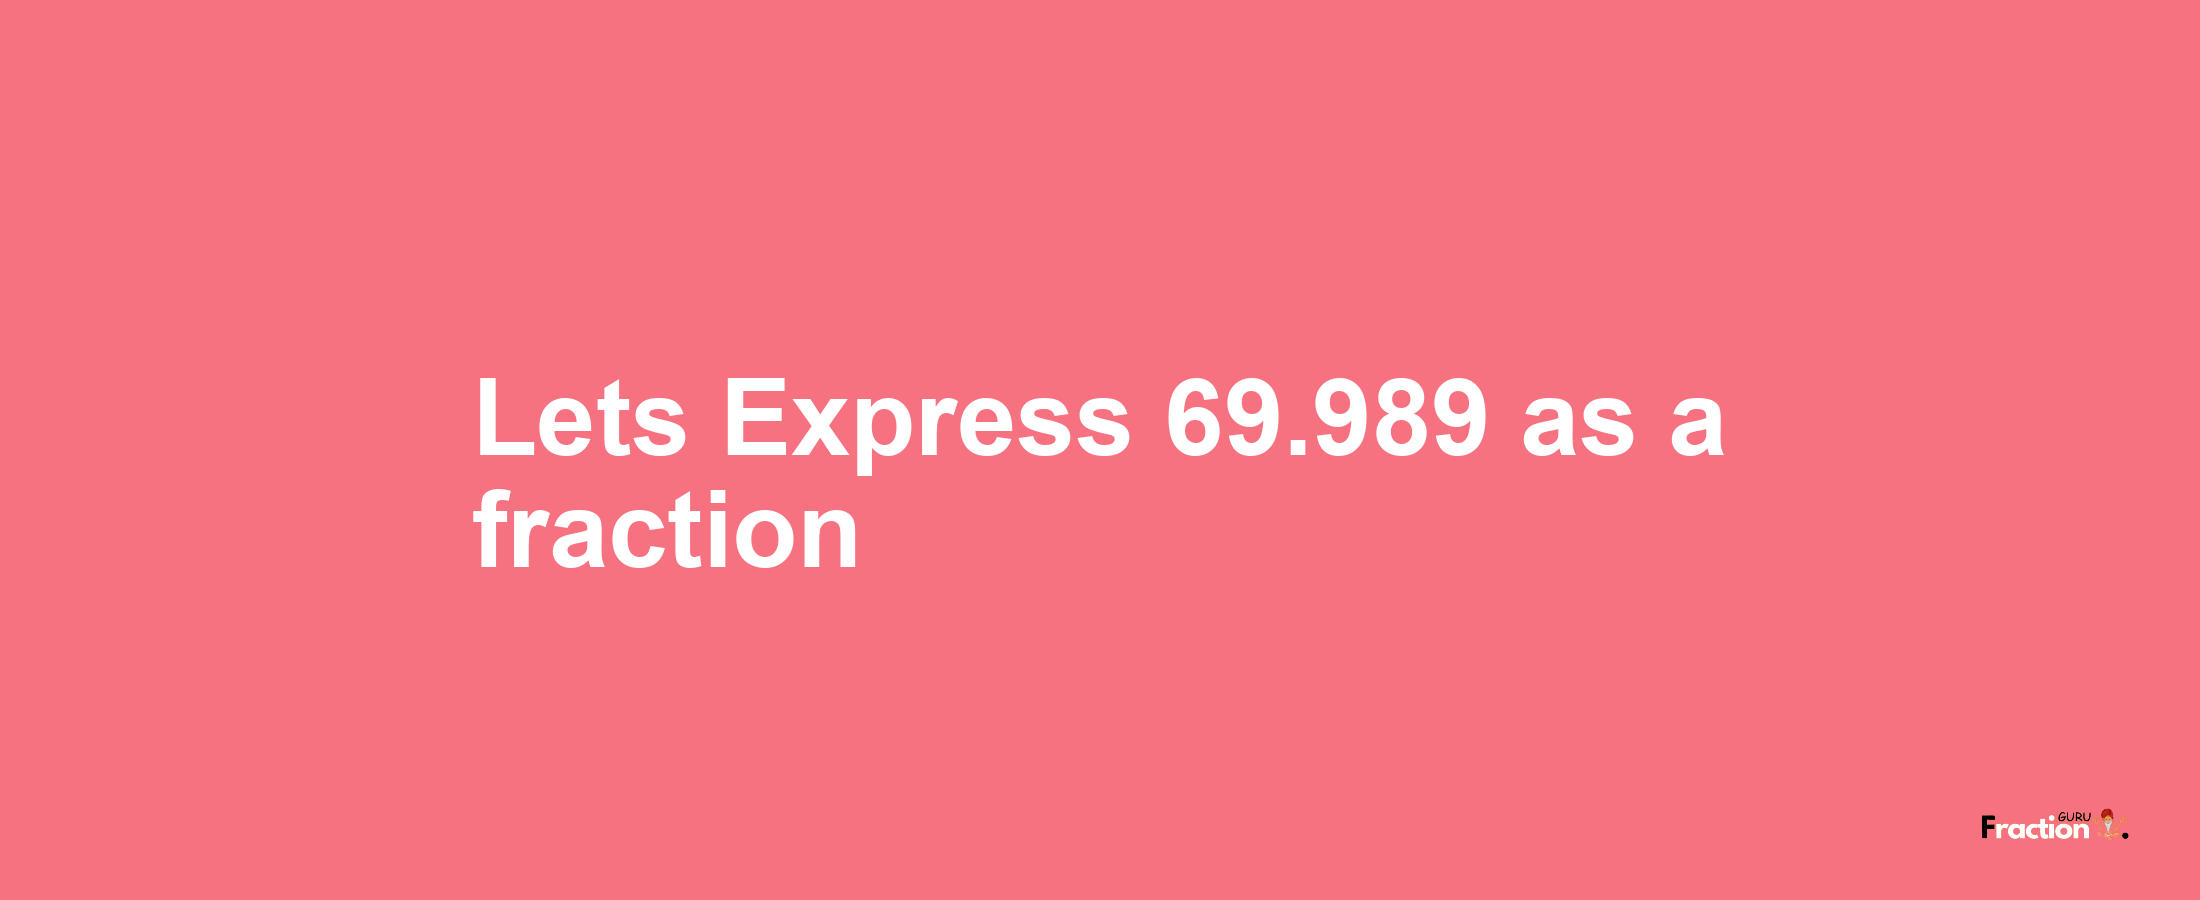 Lets Express 69.989 as afraction